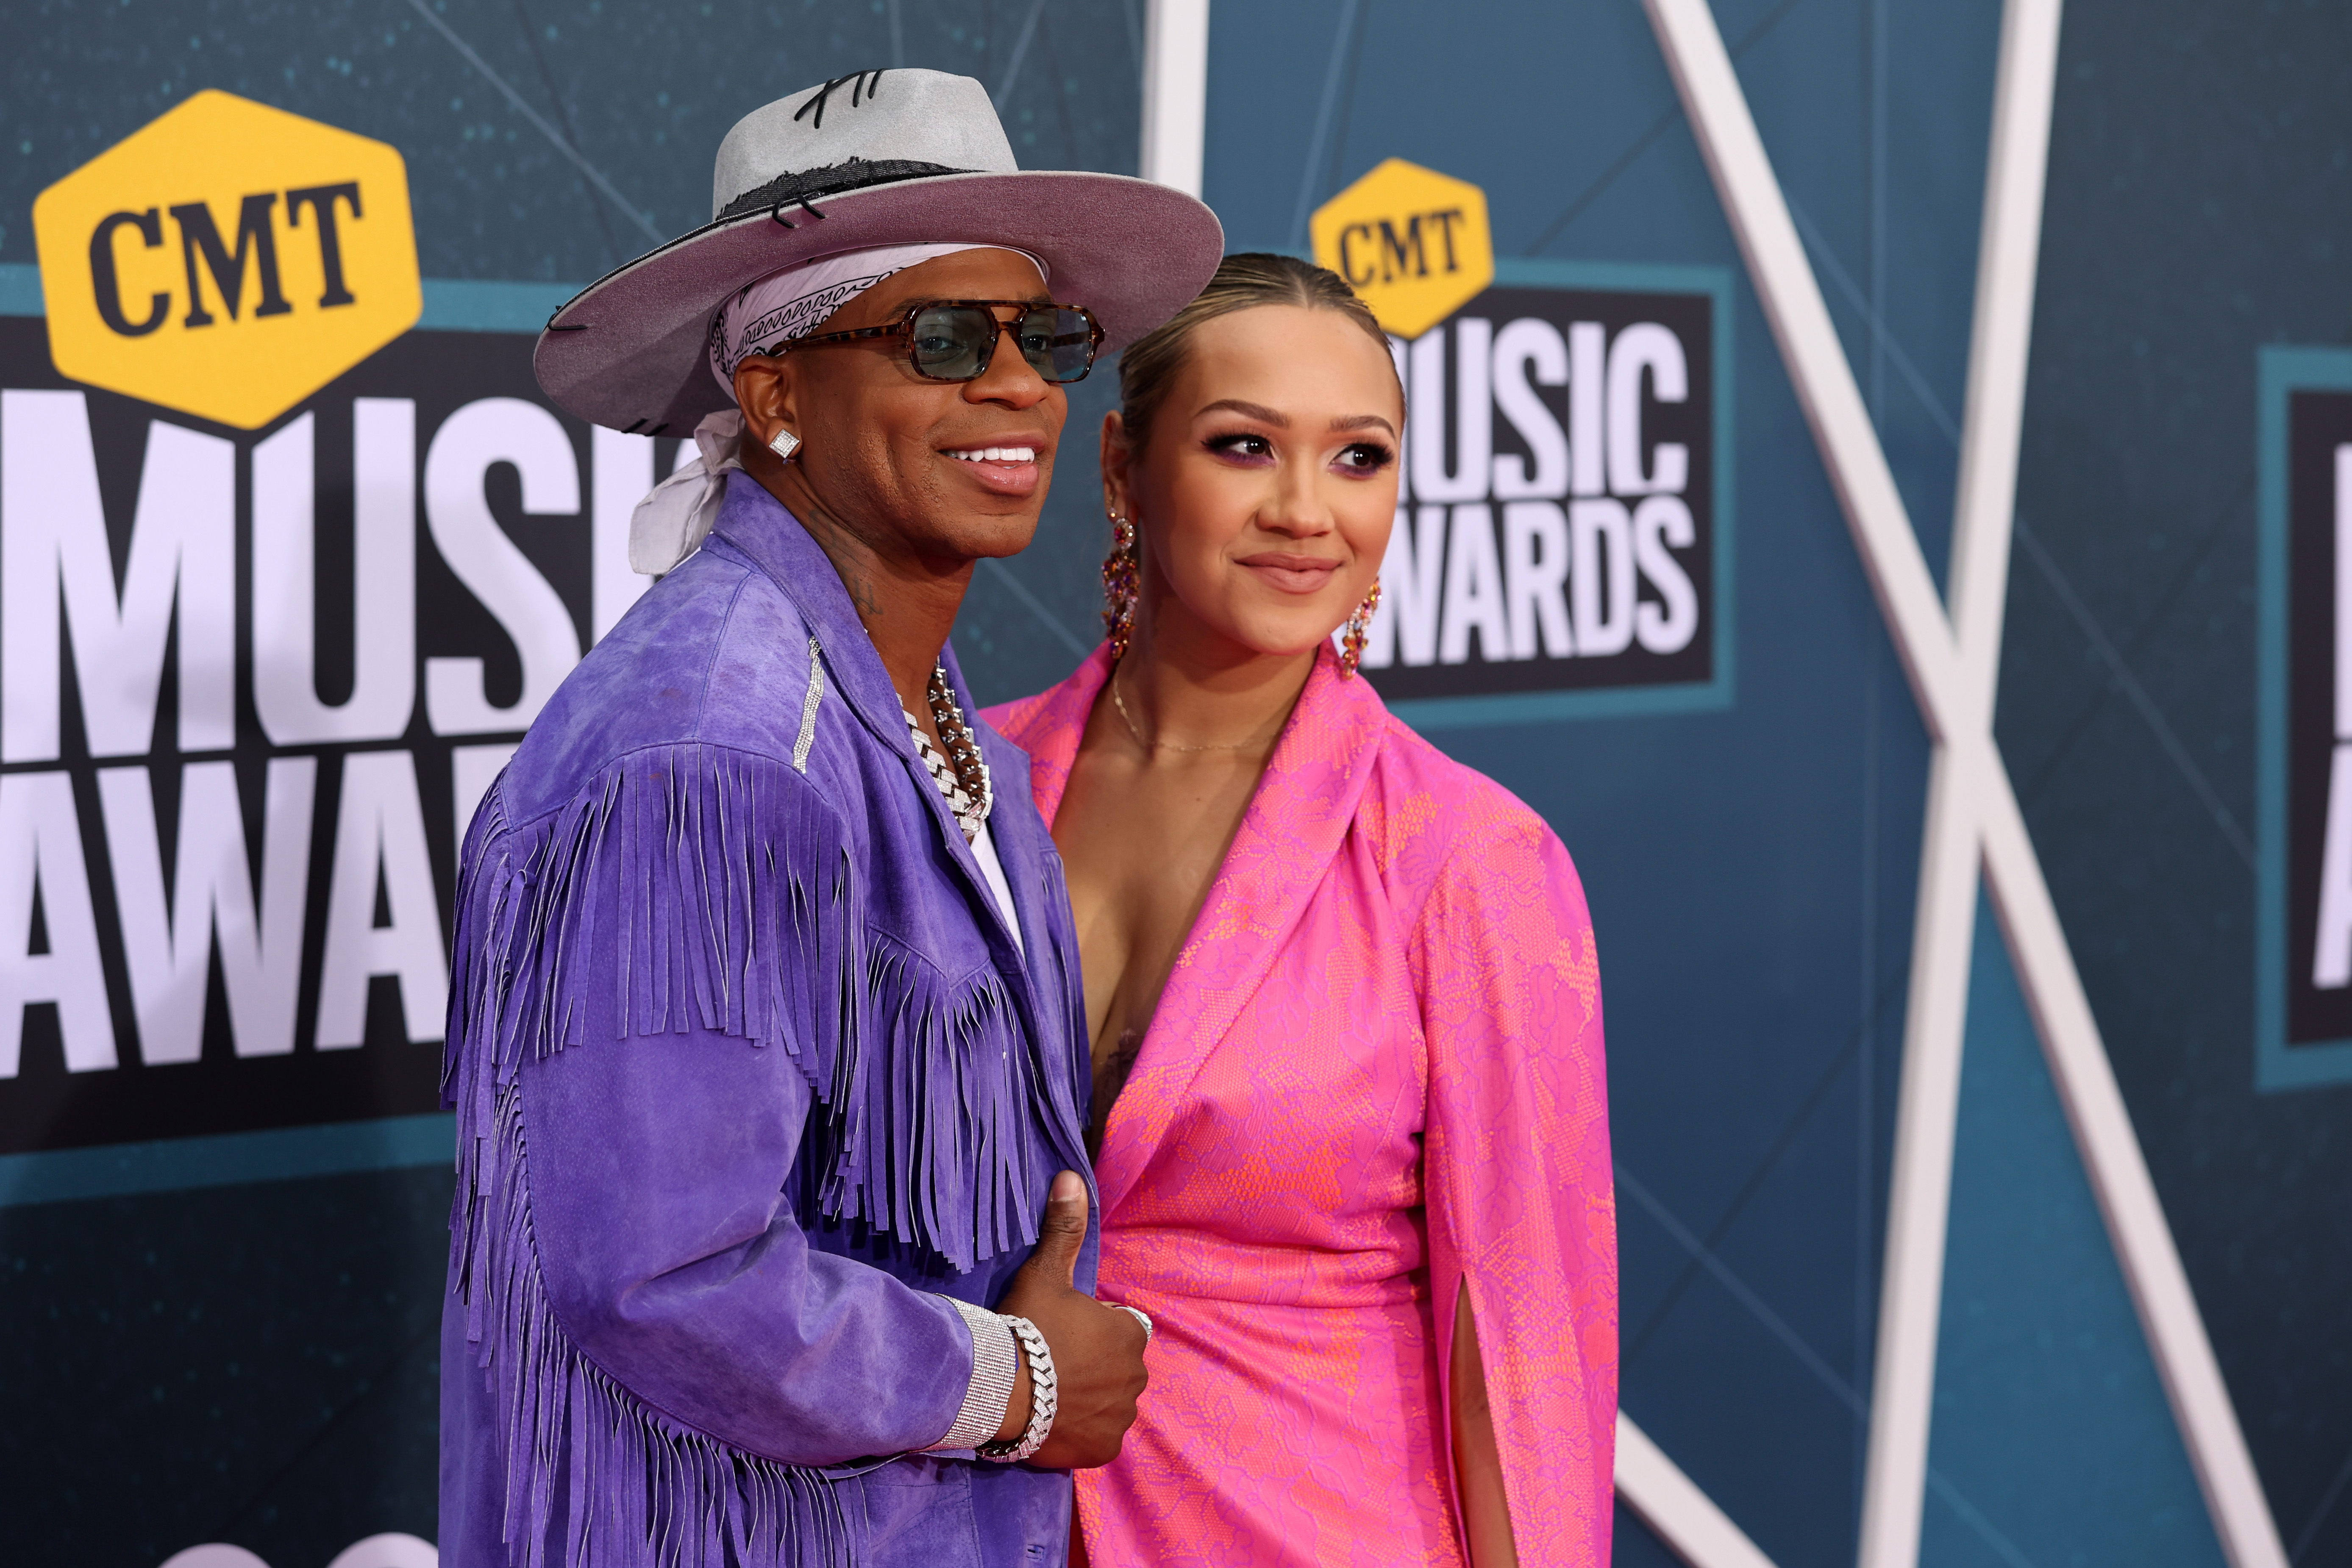 Jimmie Allen and Alexis Gale attend the 2022 CMT Music Awards at Nashville Municipal Auditorium on April 11, 2022, in Nashville, Tennessee. | Source: Getty Images